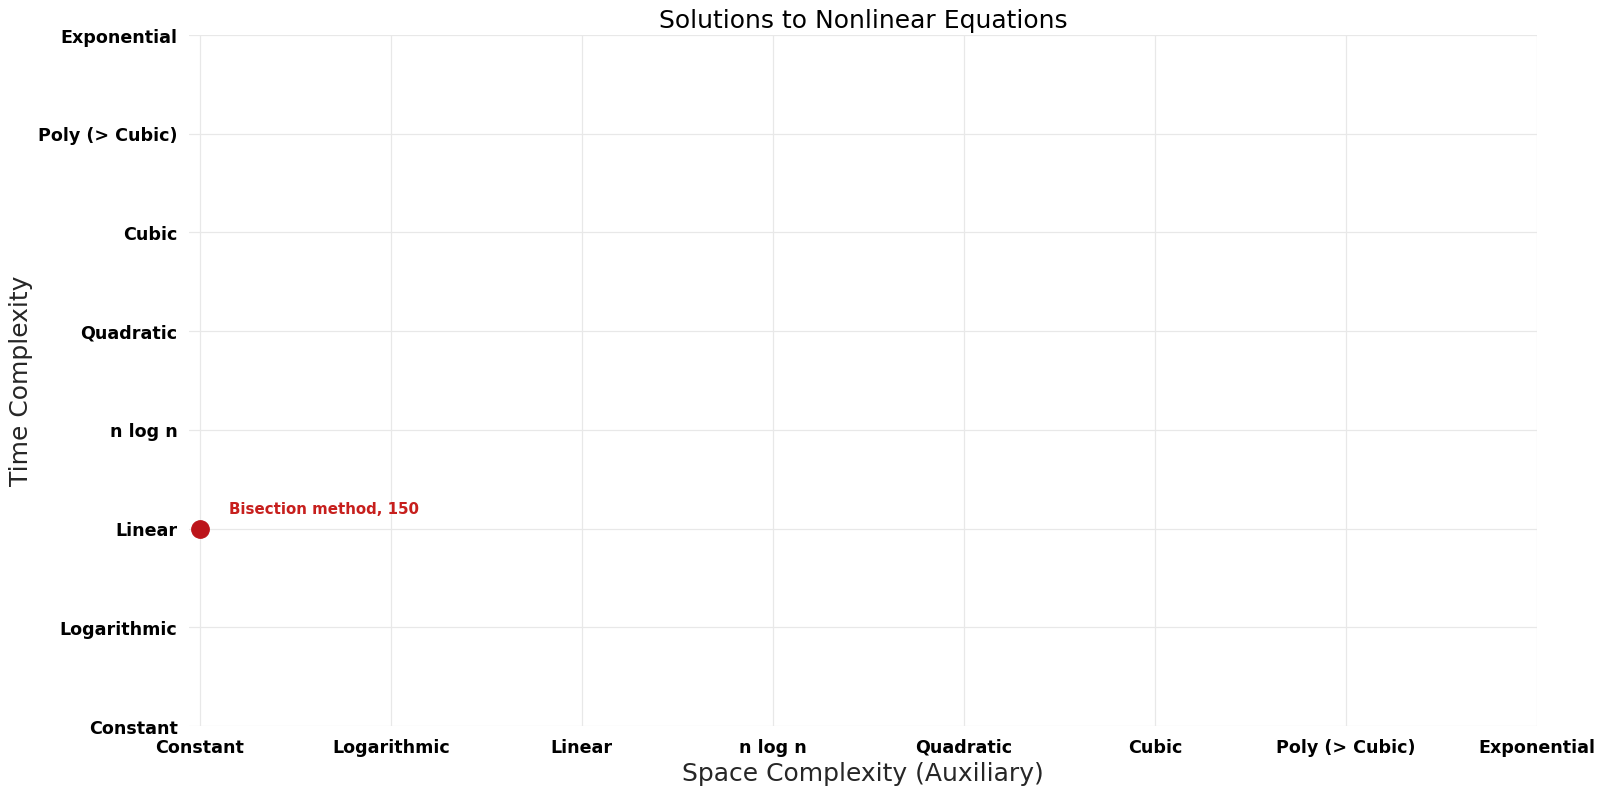 Solutions to Nonlinear Equations - Pareto Frontier.png